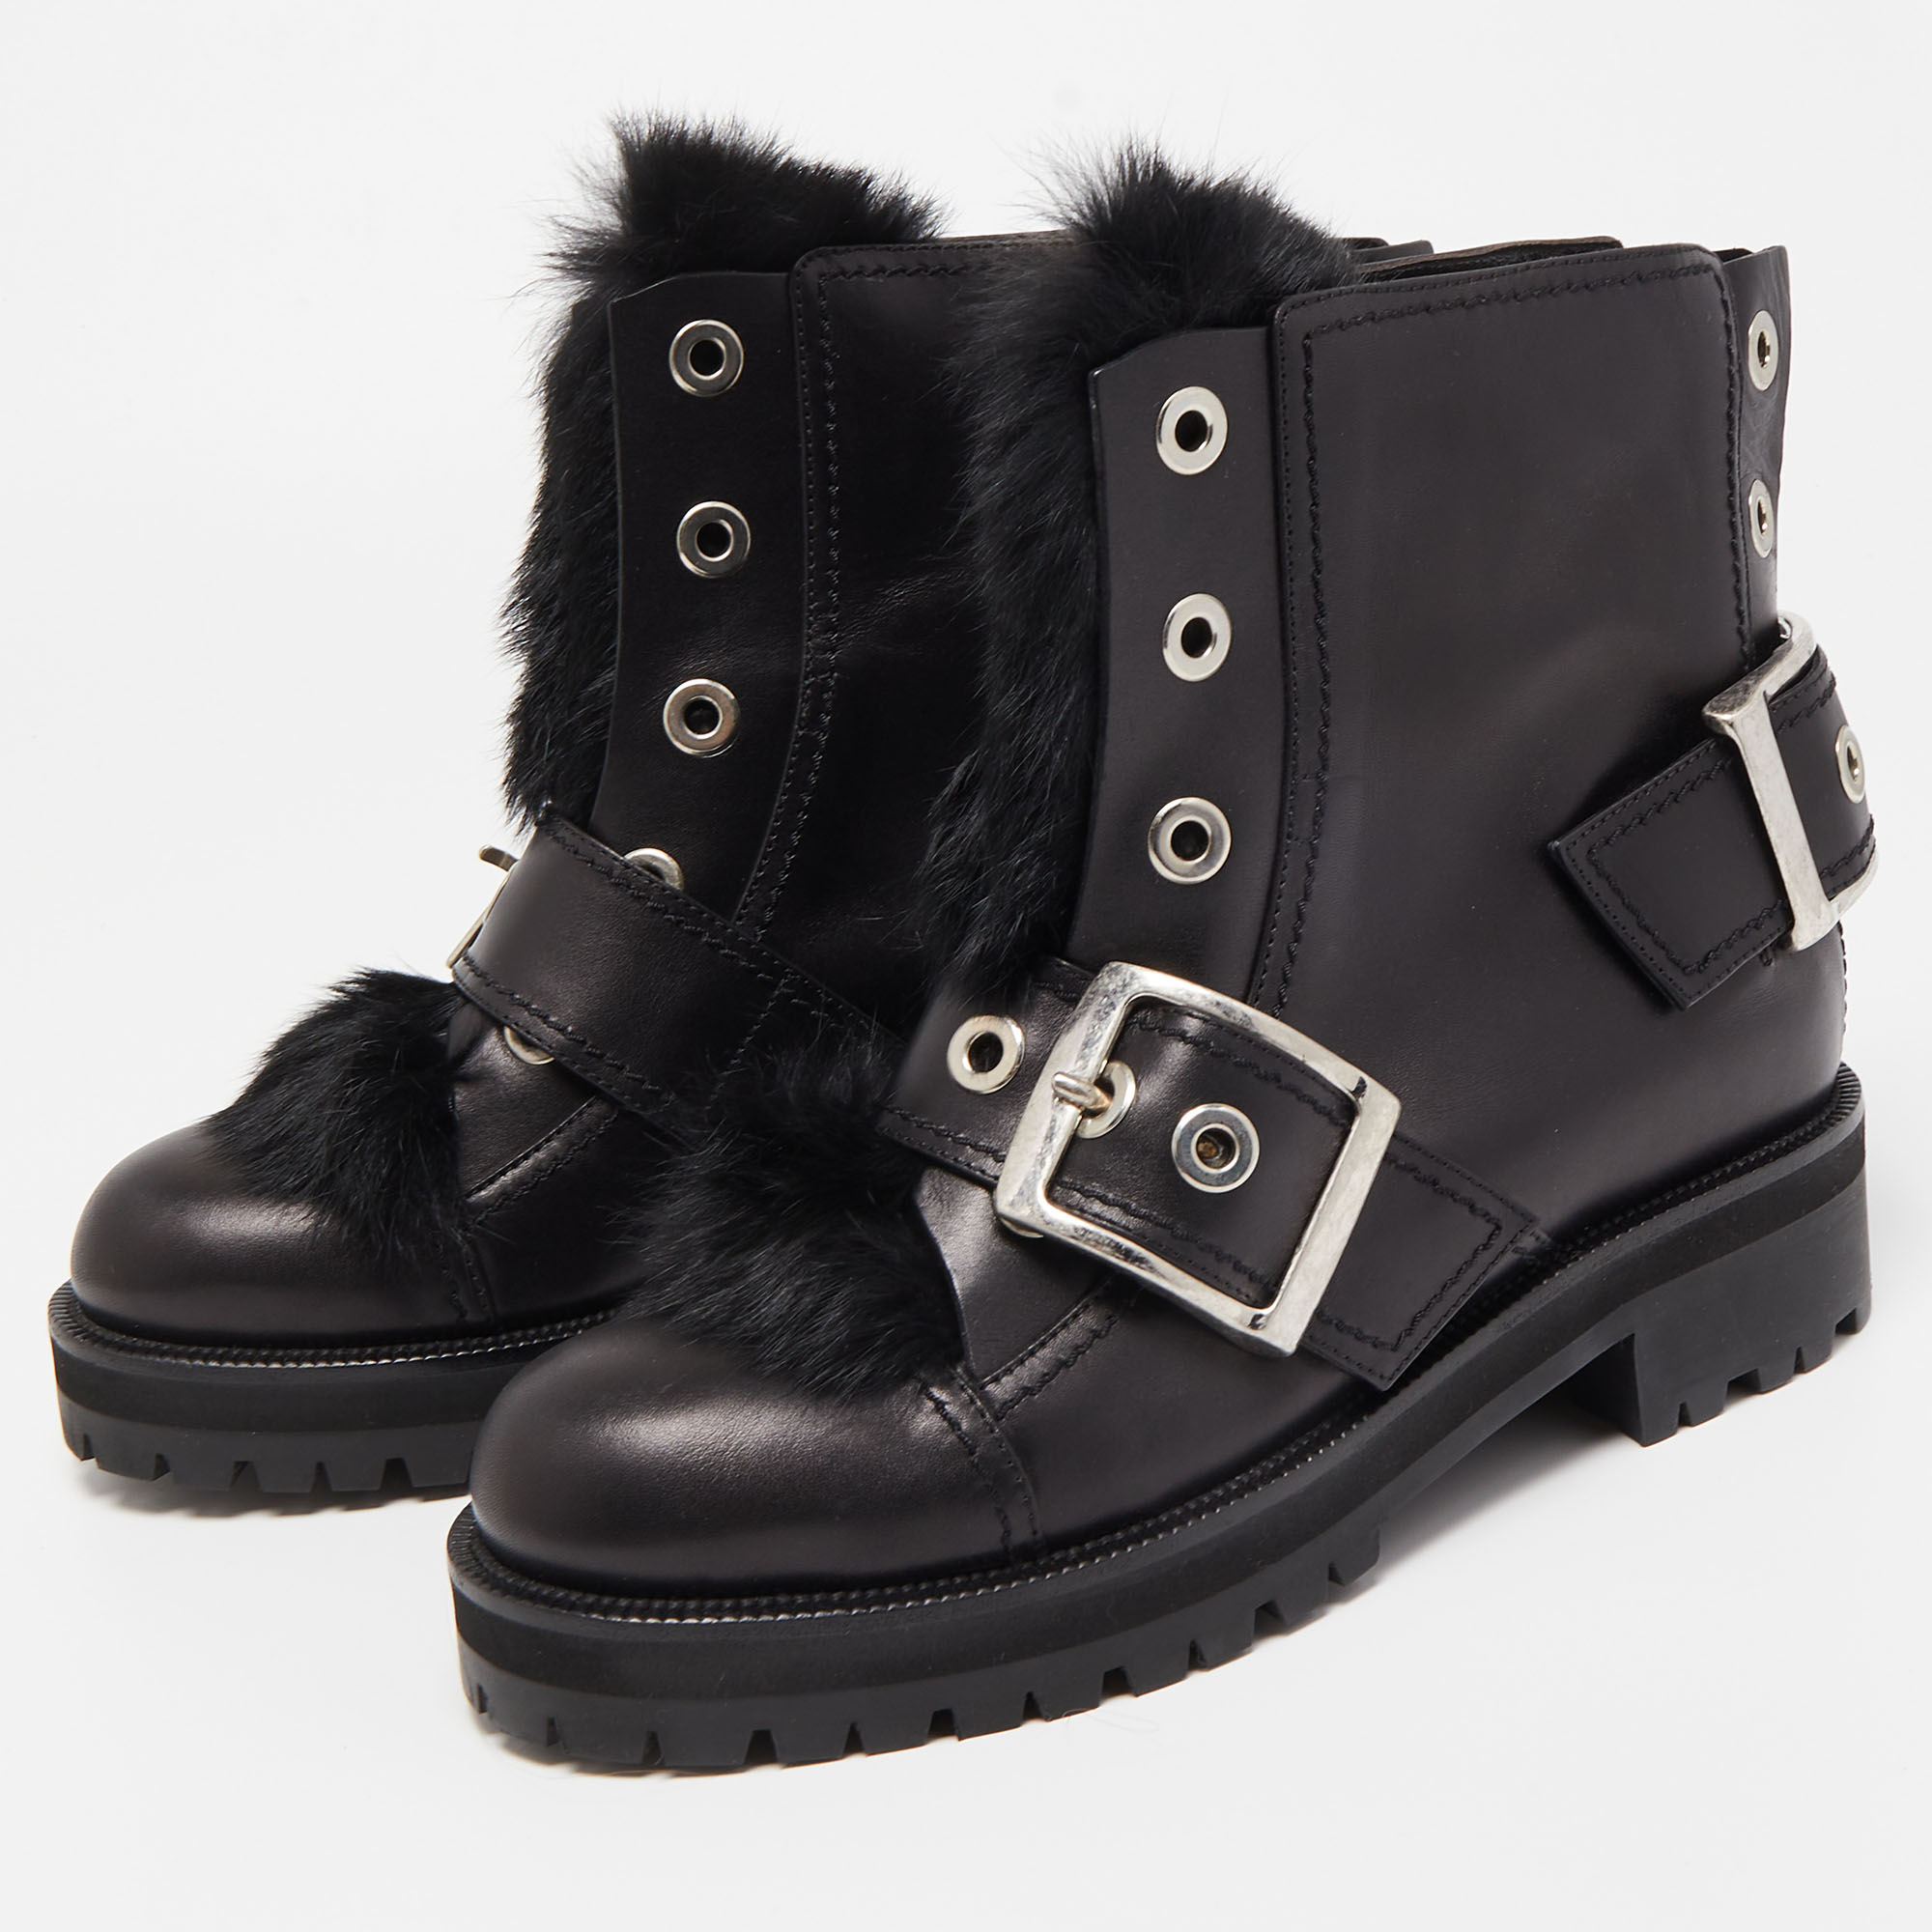 

Alexander McQueen Black Leather and Fur Buckle Detail Ankle Boots Size